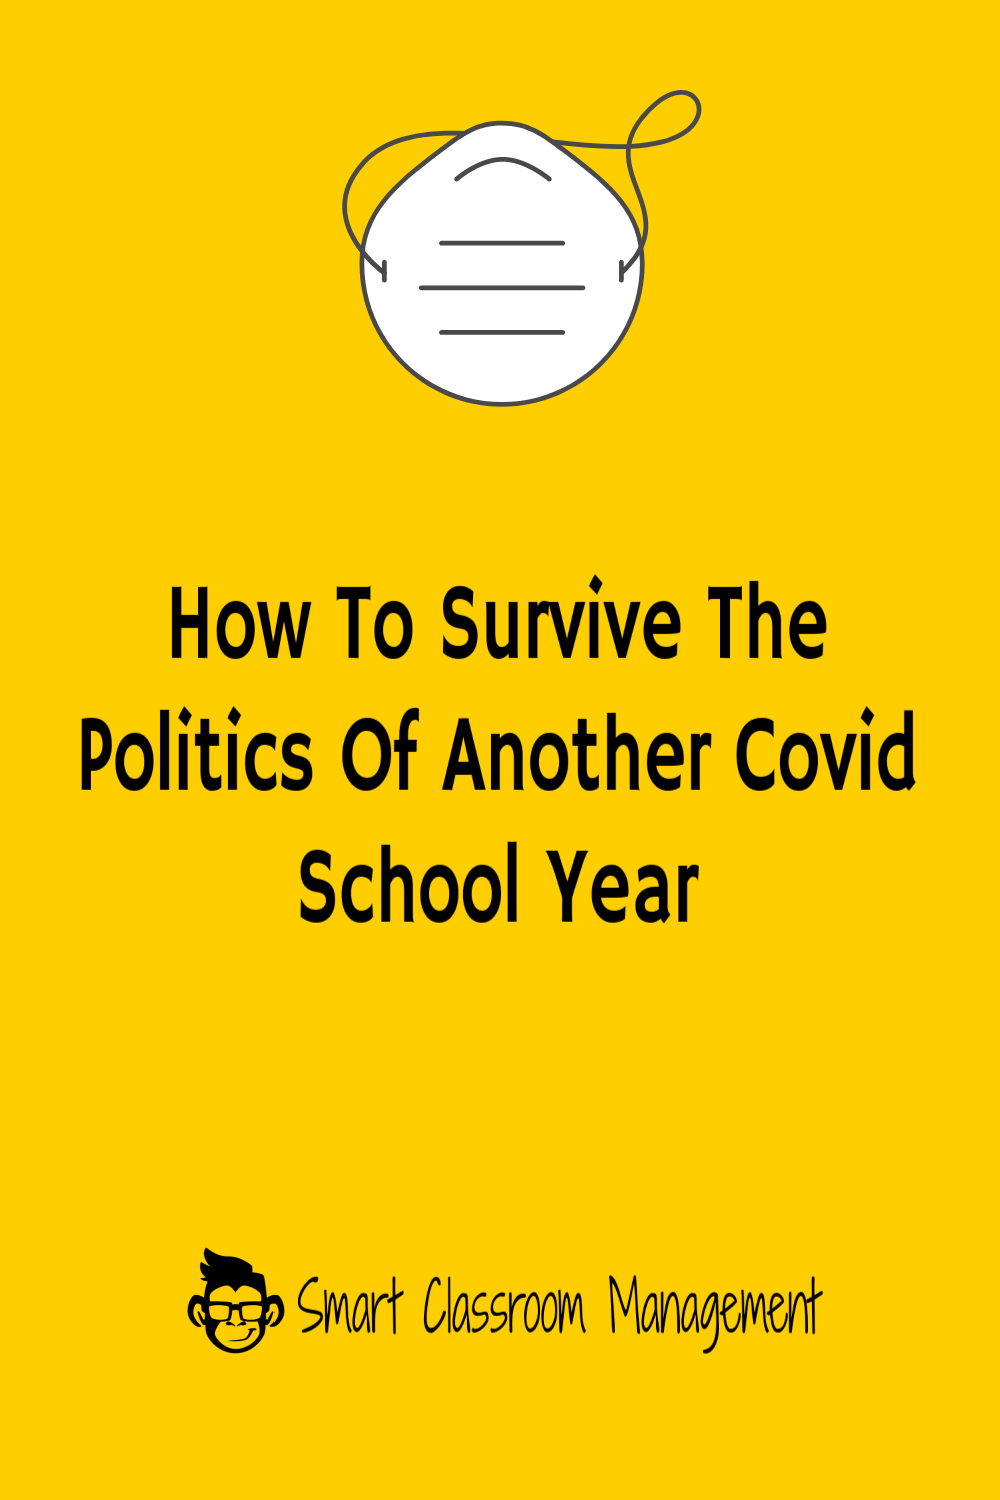 Smart Classroom Manasgement: How To Survive The Politics Of Another Covid School Year